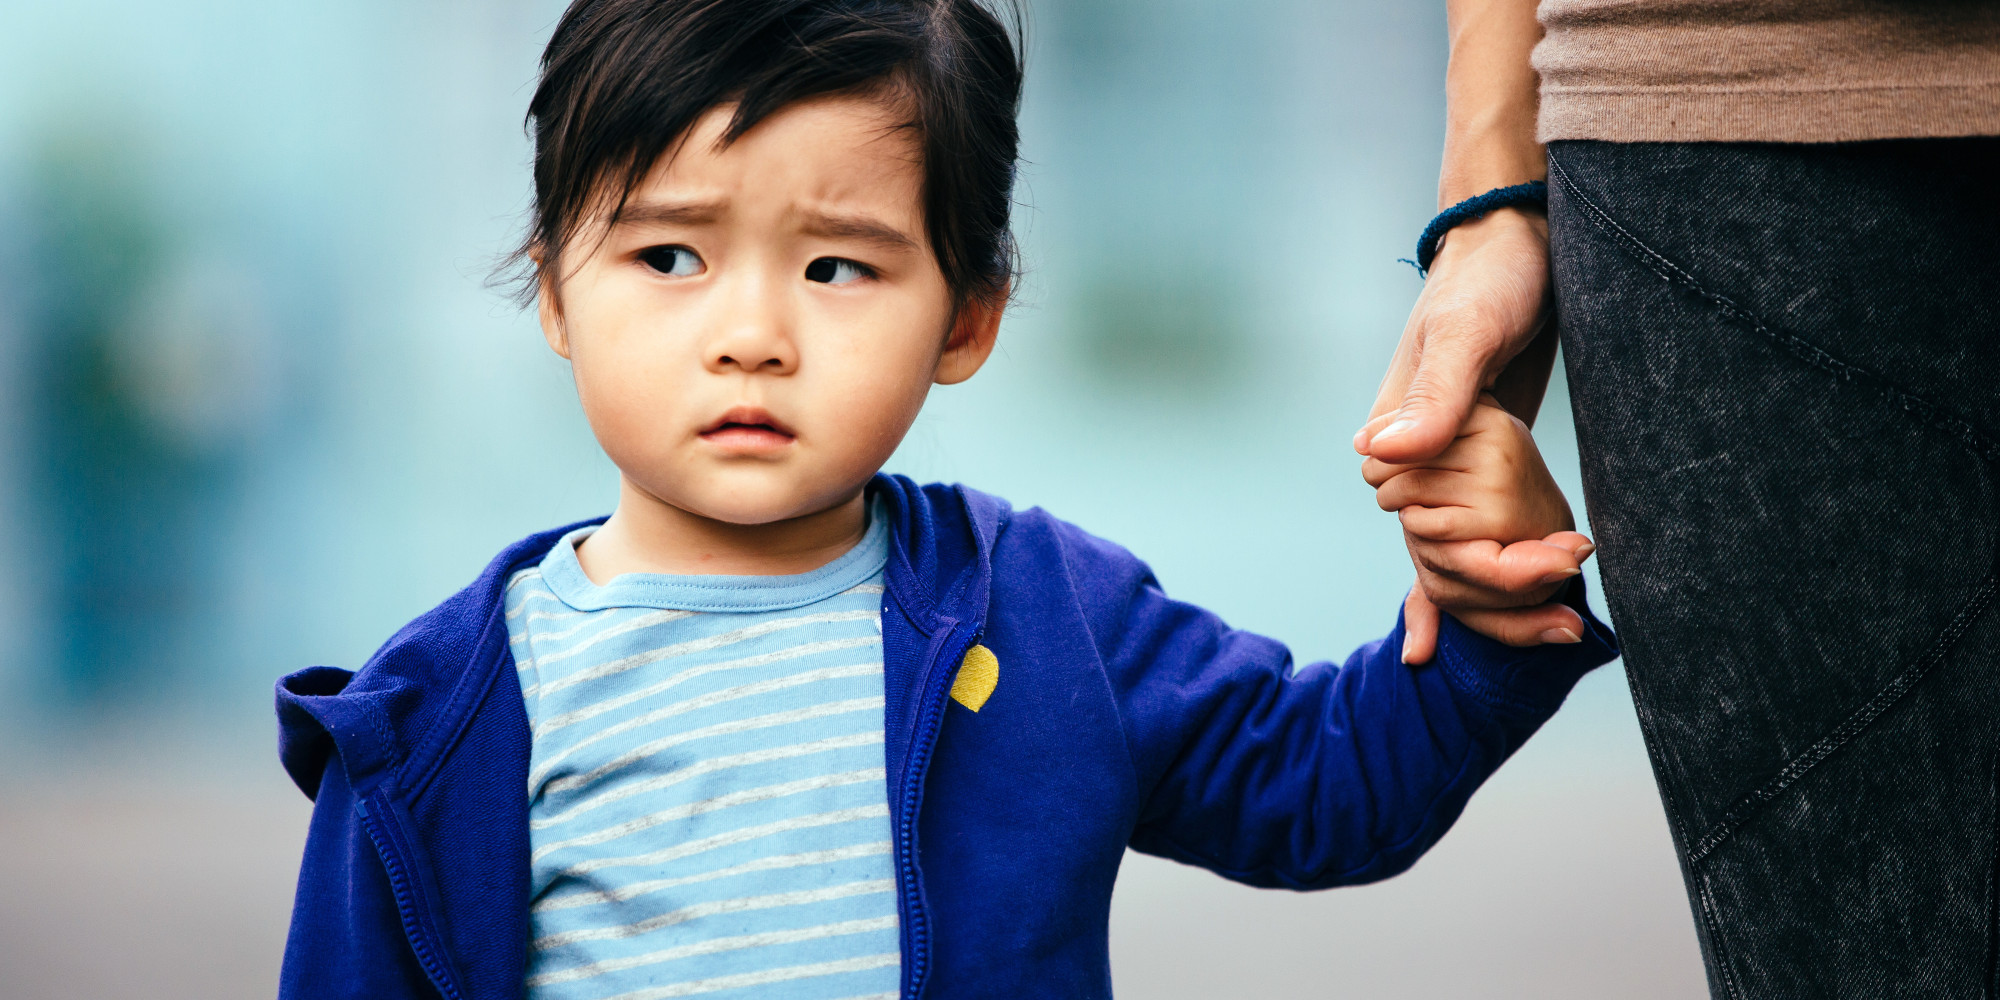 5 Tips to Keep Children Safe From Predators | HuffPost